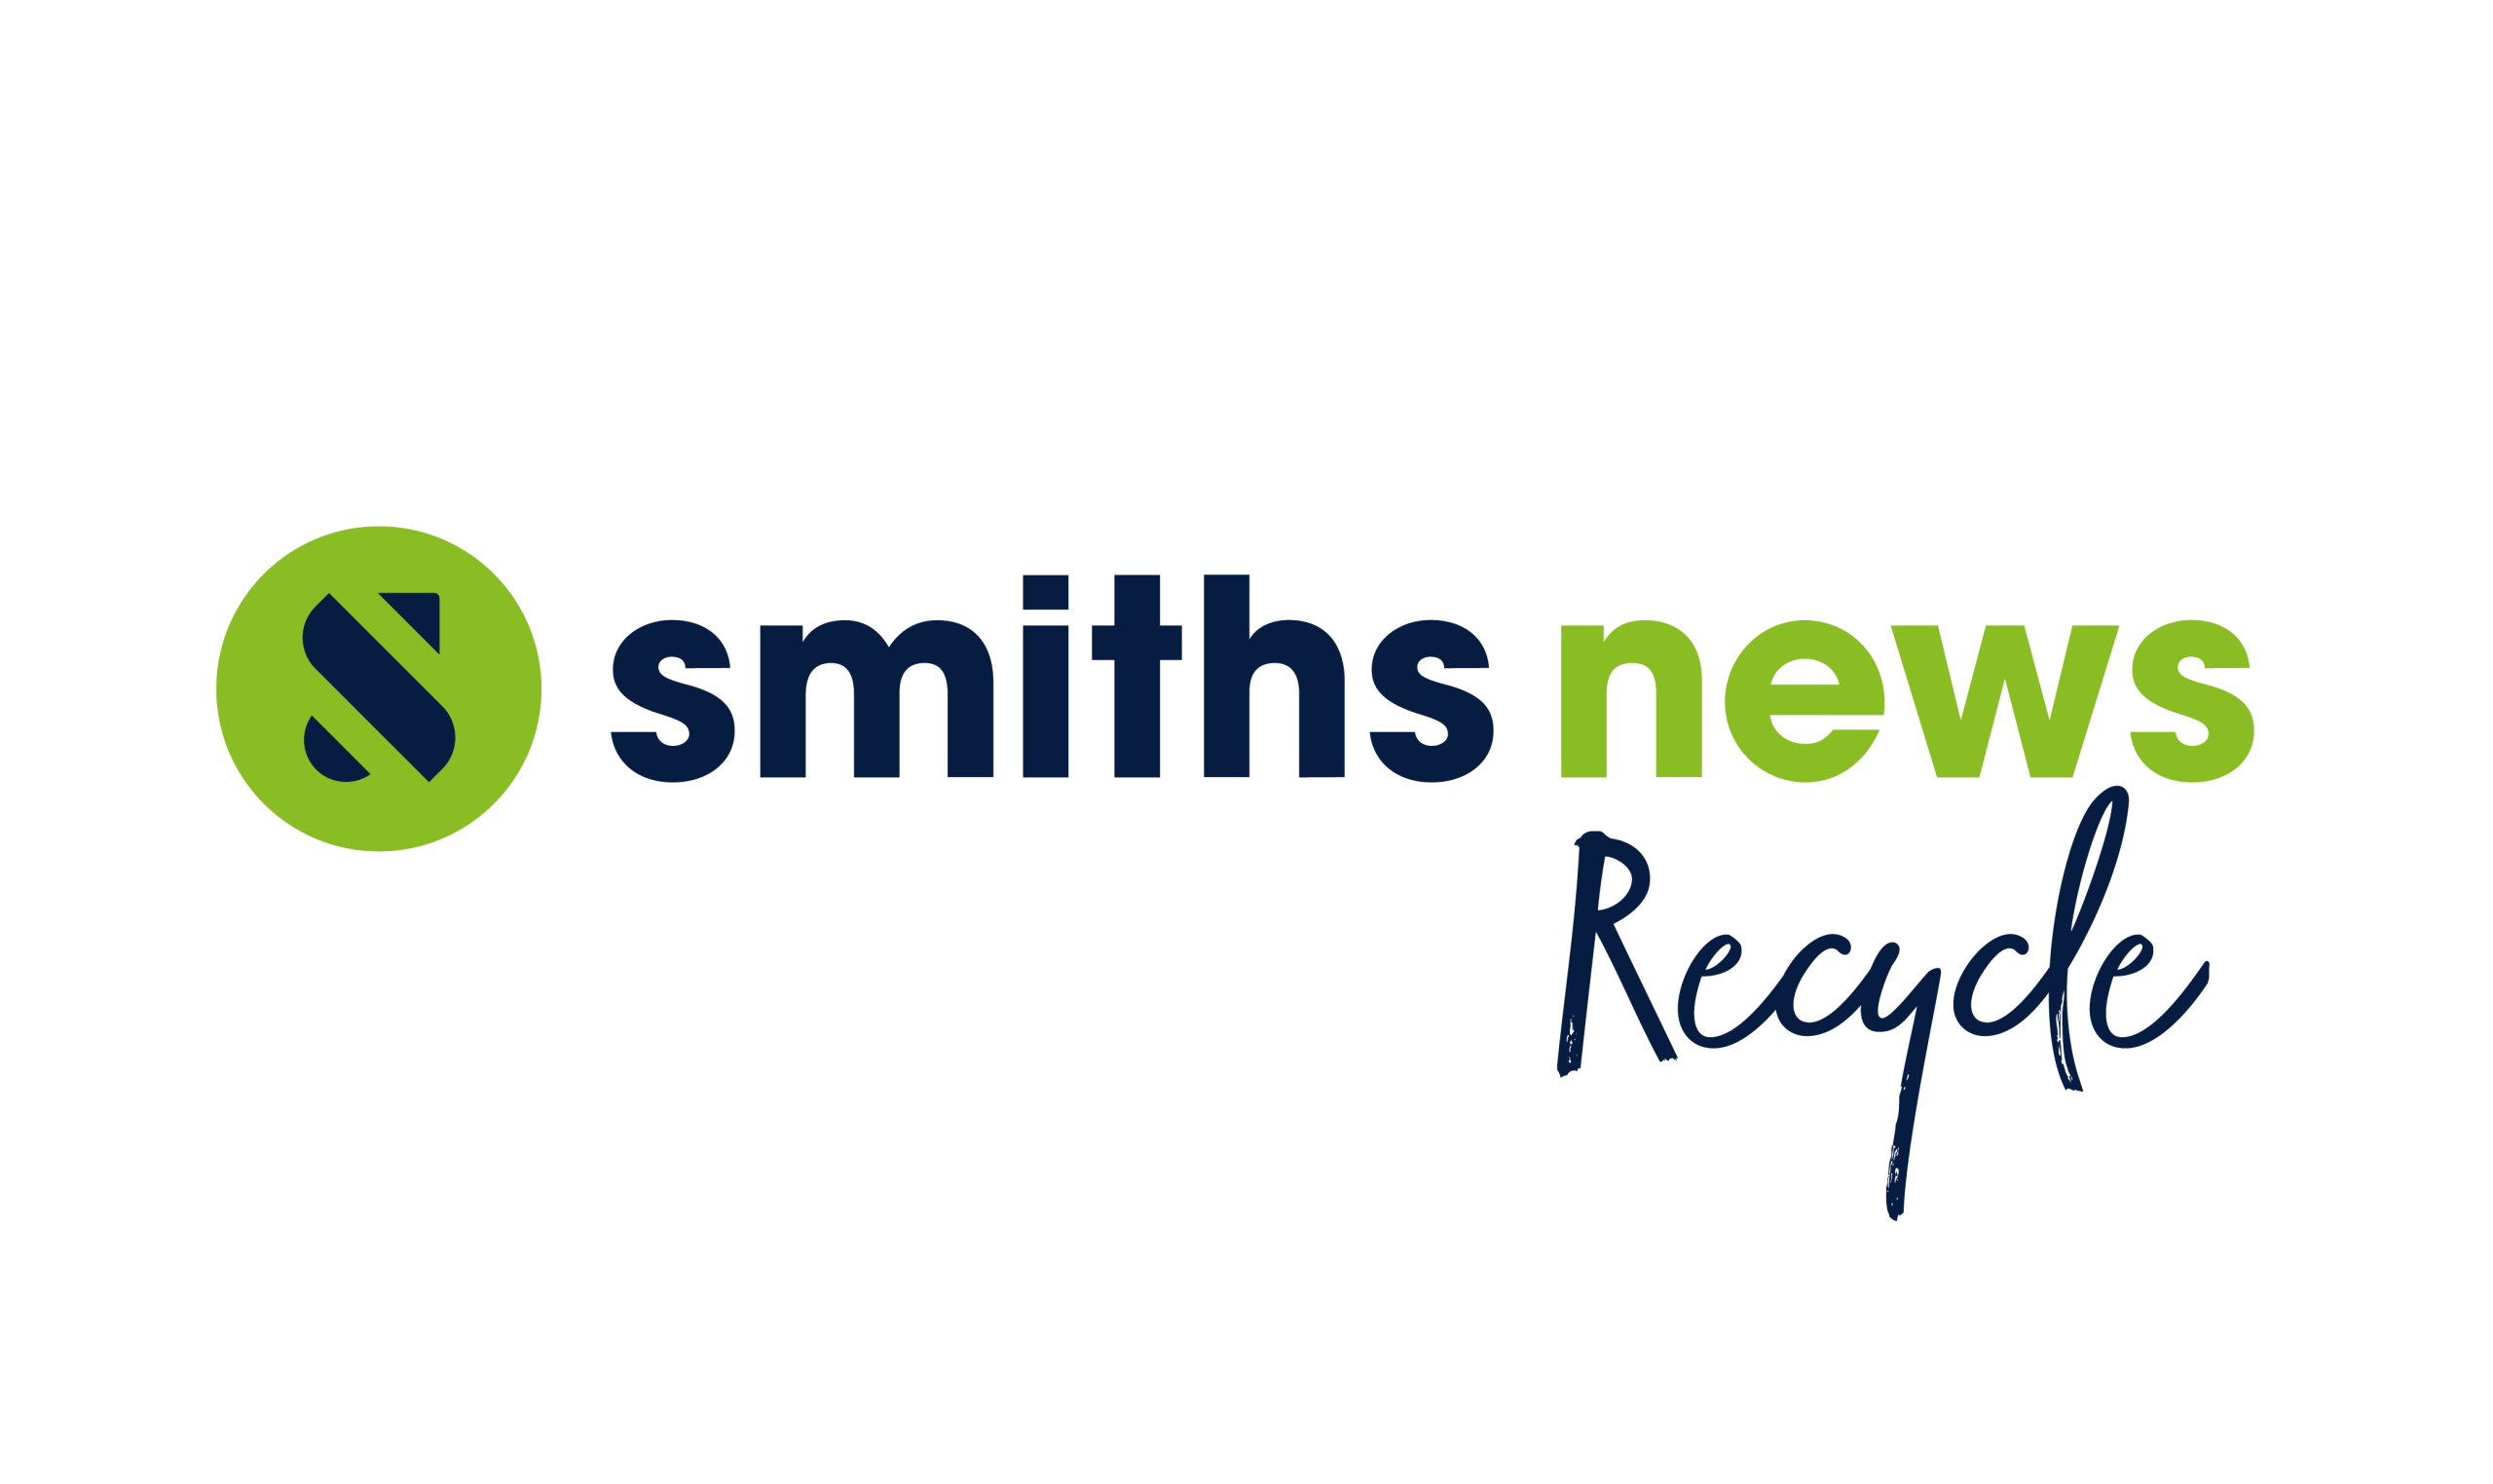 Smiths News launches recycling collection service for retailers